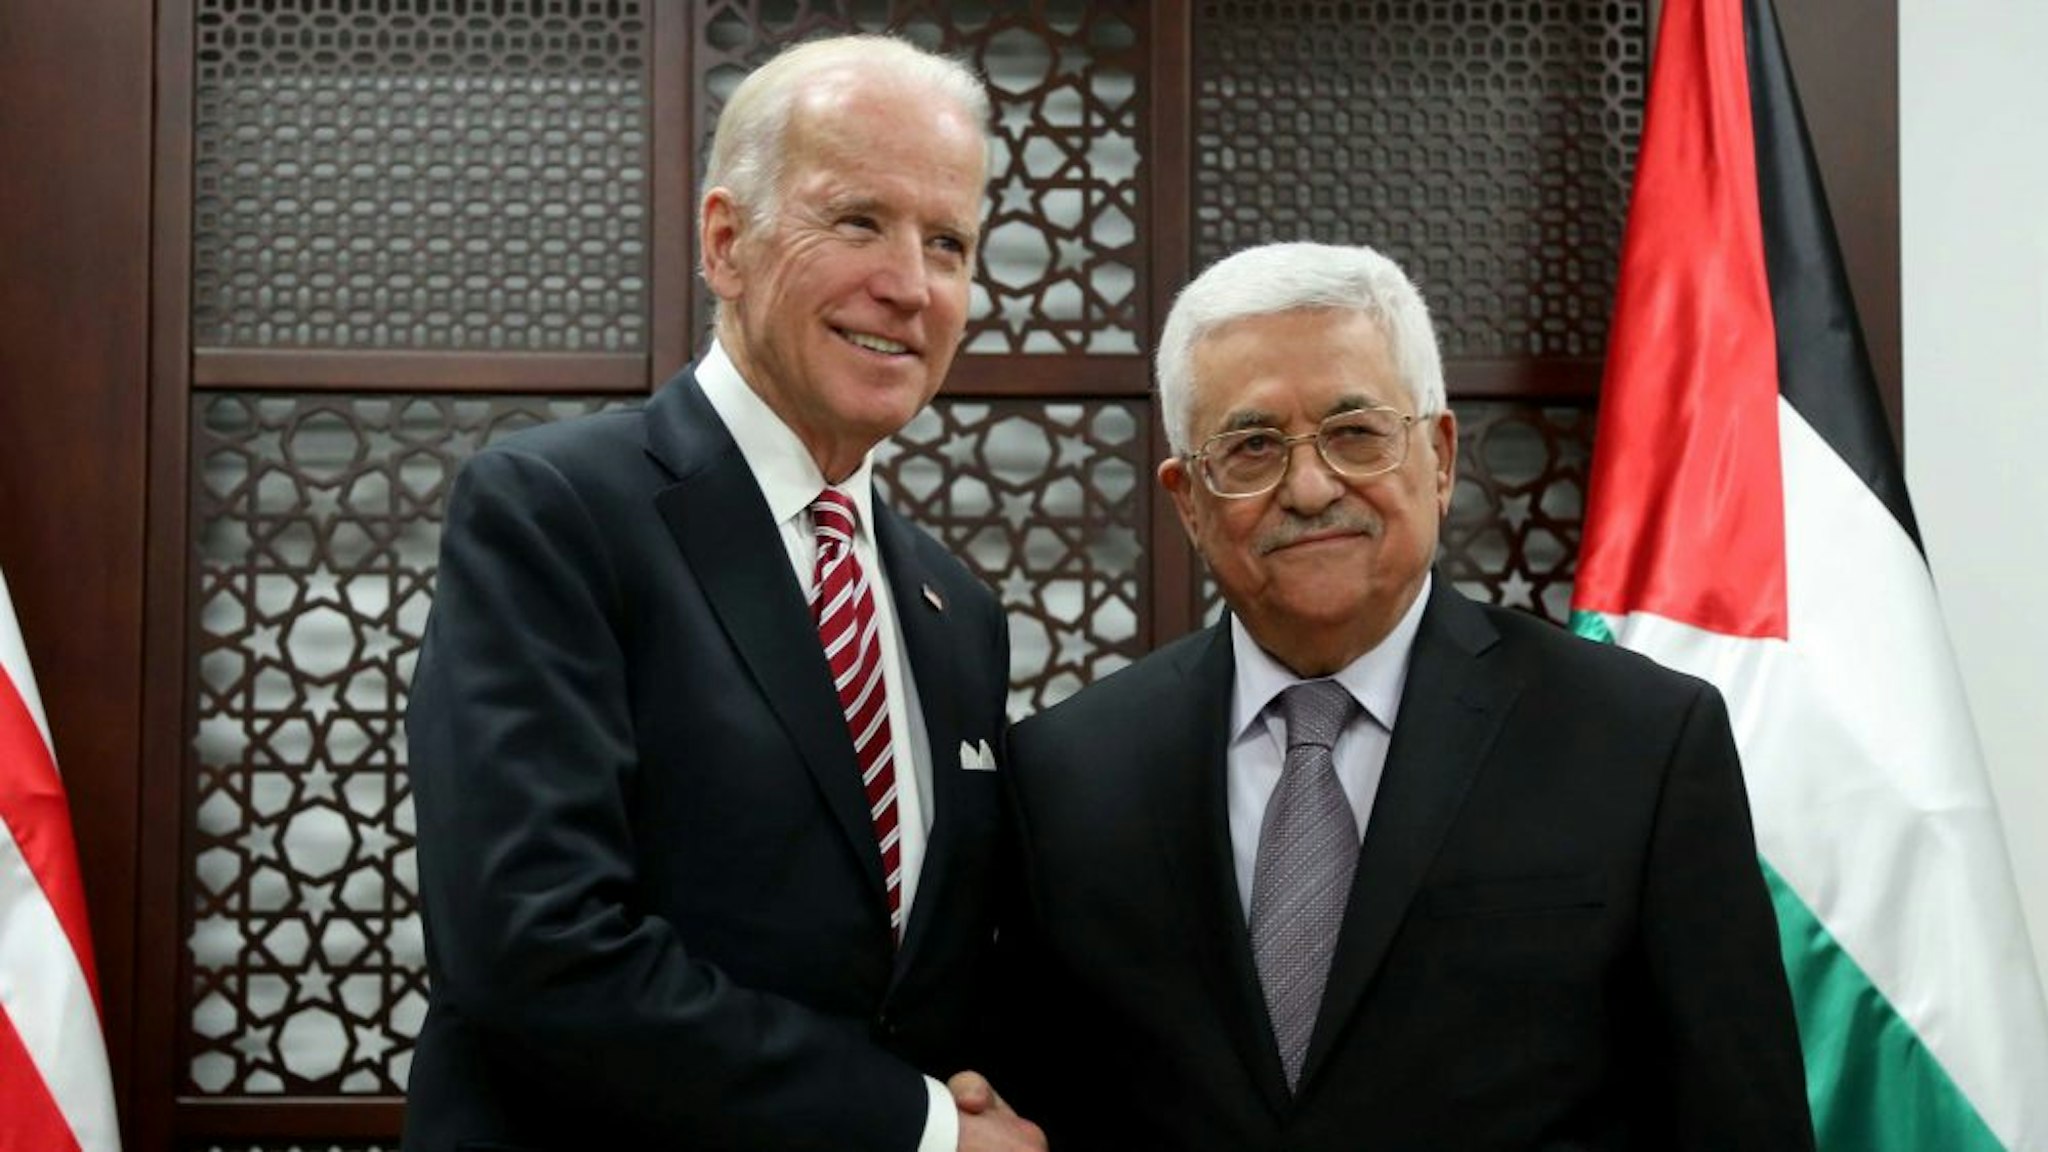 RAMALLAH, WEST BANK - MARCH 9: Vice President of the United States Joe Biden (L) meets Palestinian President Mahmoud Abbas (R) in Ramallah, West Bank on March 9, 2016.